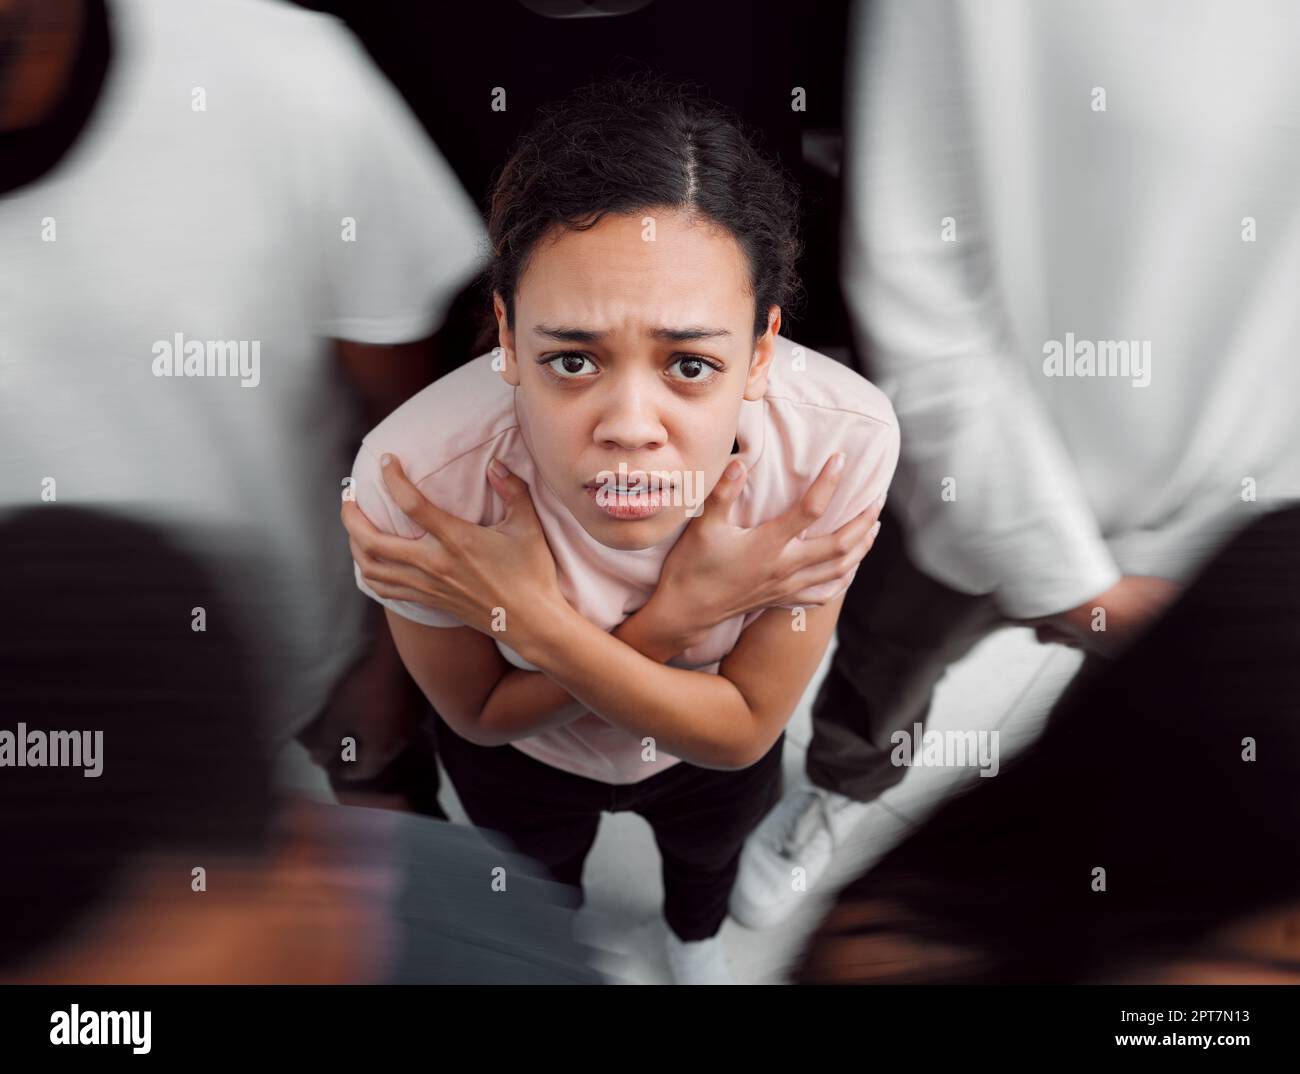 No light that comes on slowly. a young woman experiencing mental illness while being surrounded by people inside Stock Photo